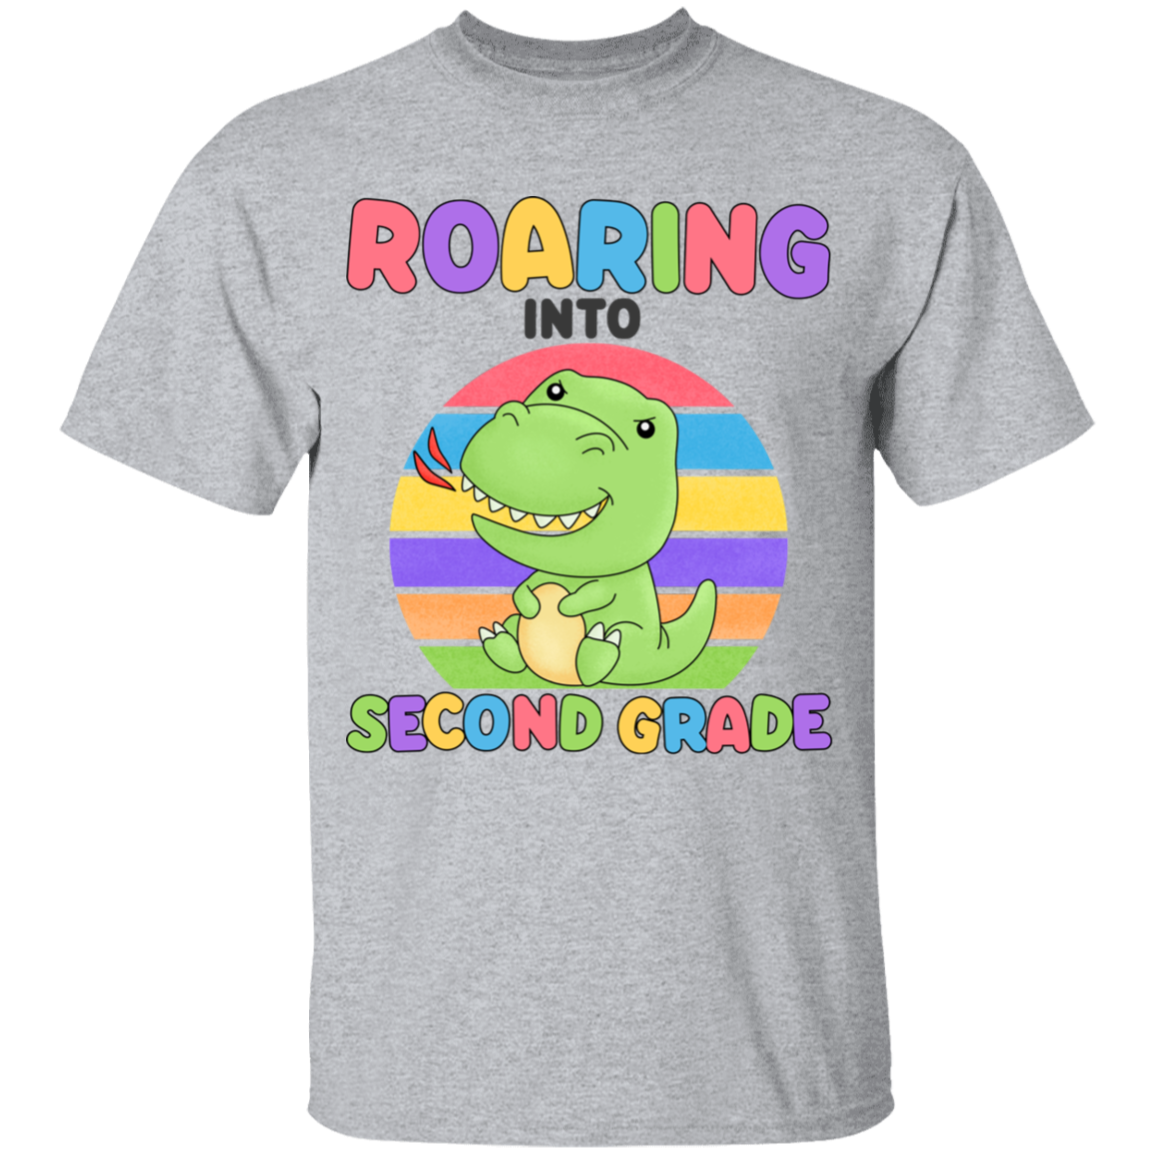 Roaring Into Second Grade Youth Cotton T-Shirt